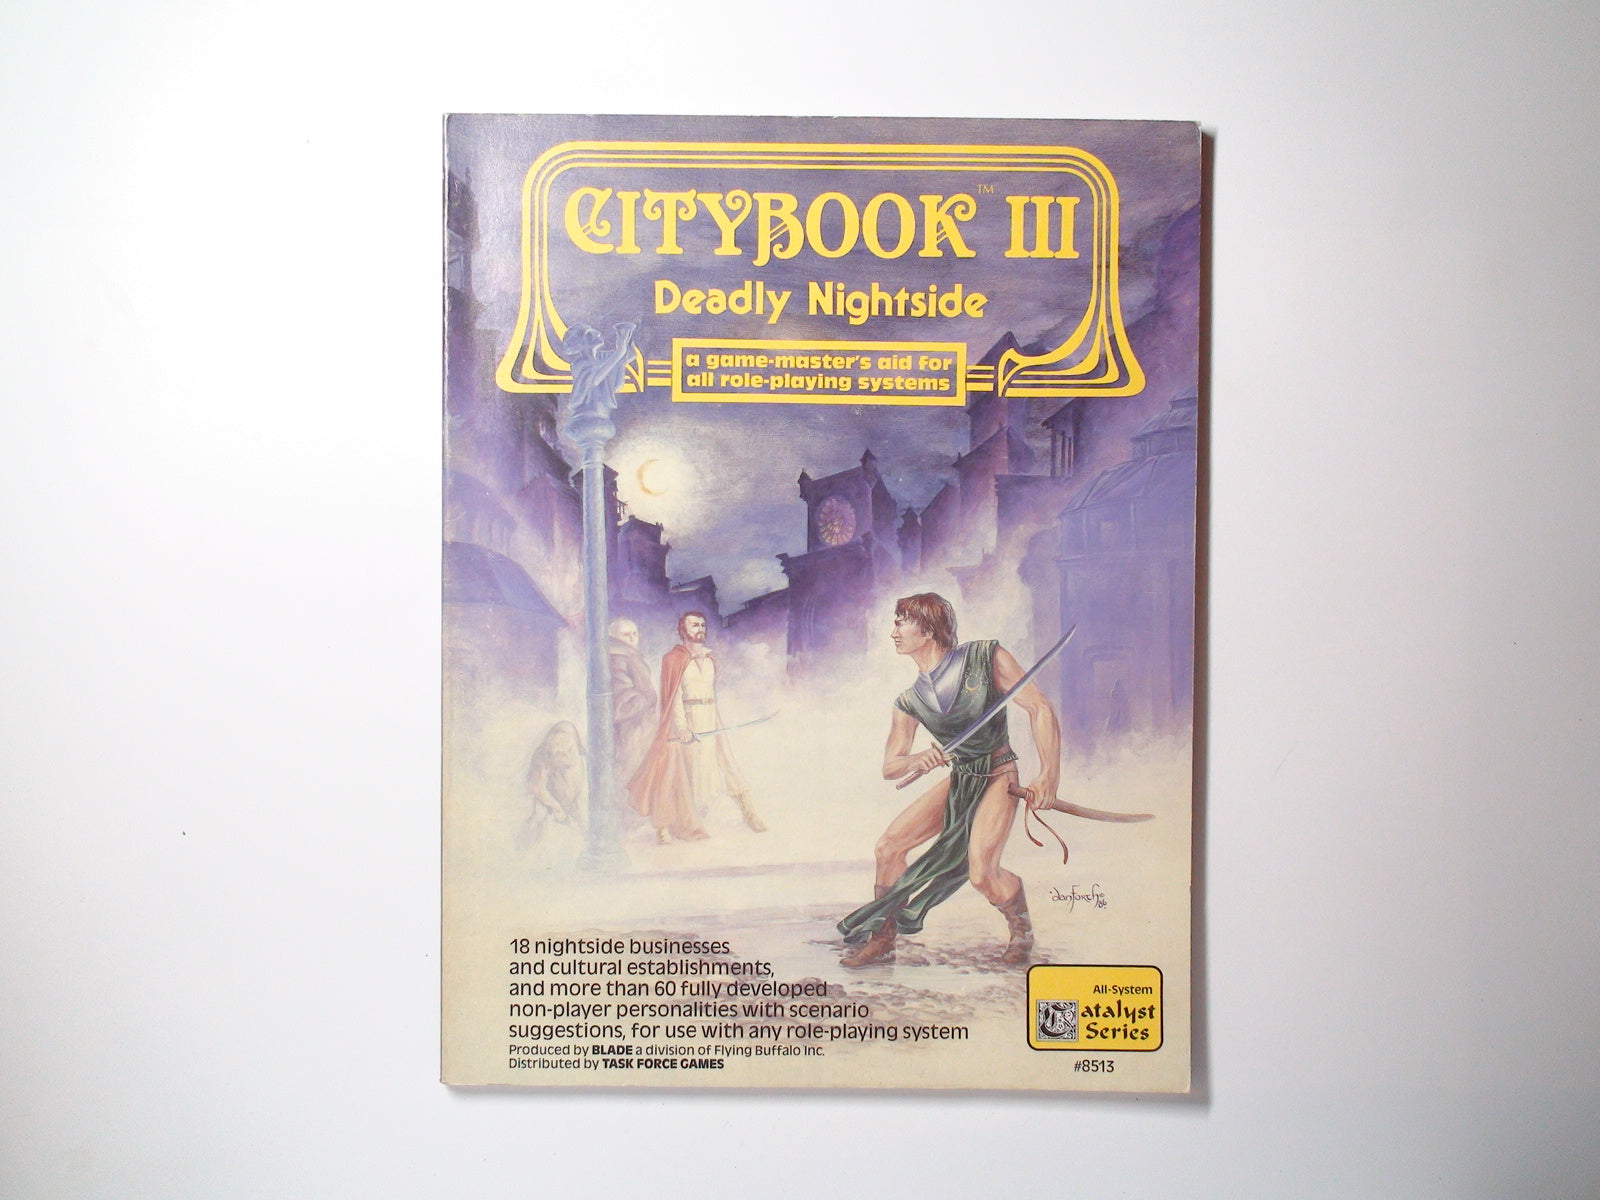 Citybook III, Deadly Nightshade, A GM Aid, Catalyst Series #8513, 1st Printing, 1987